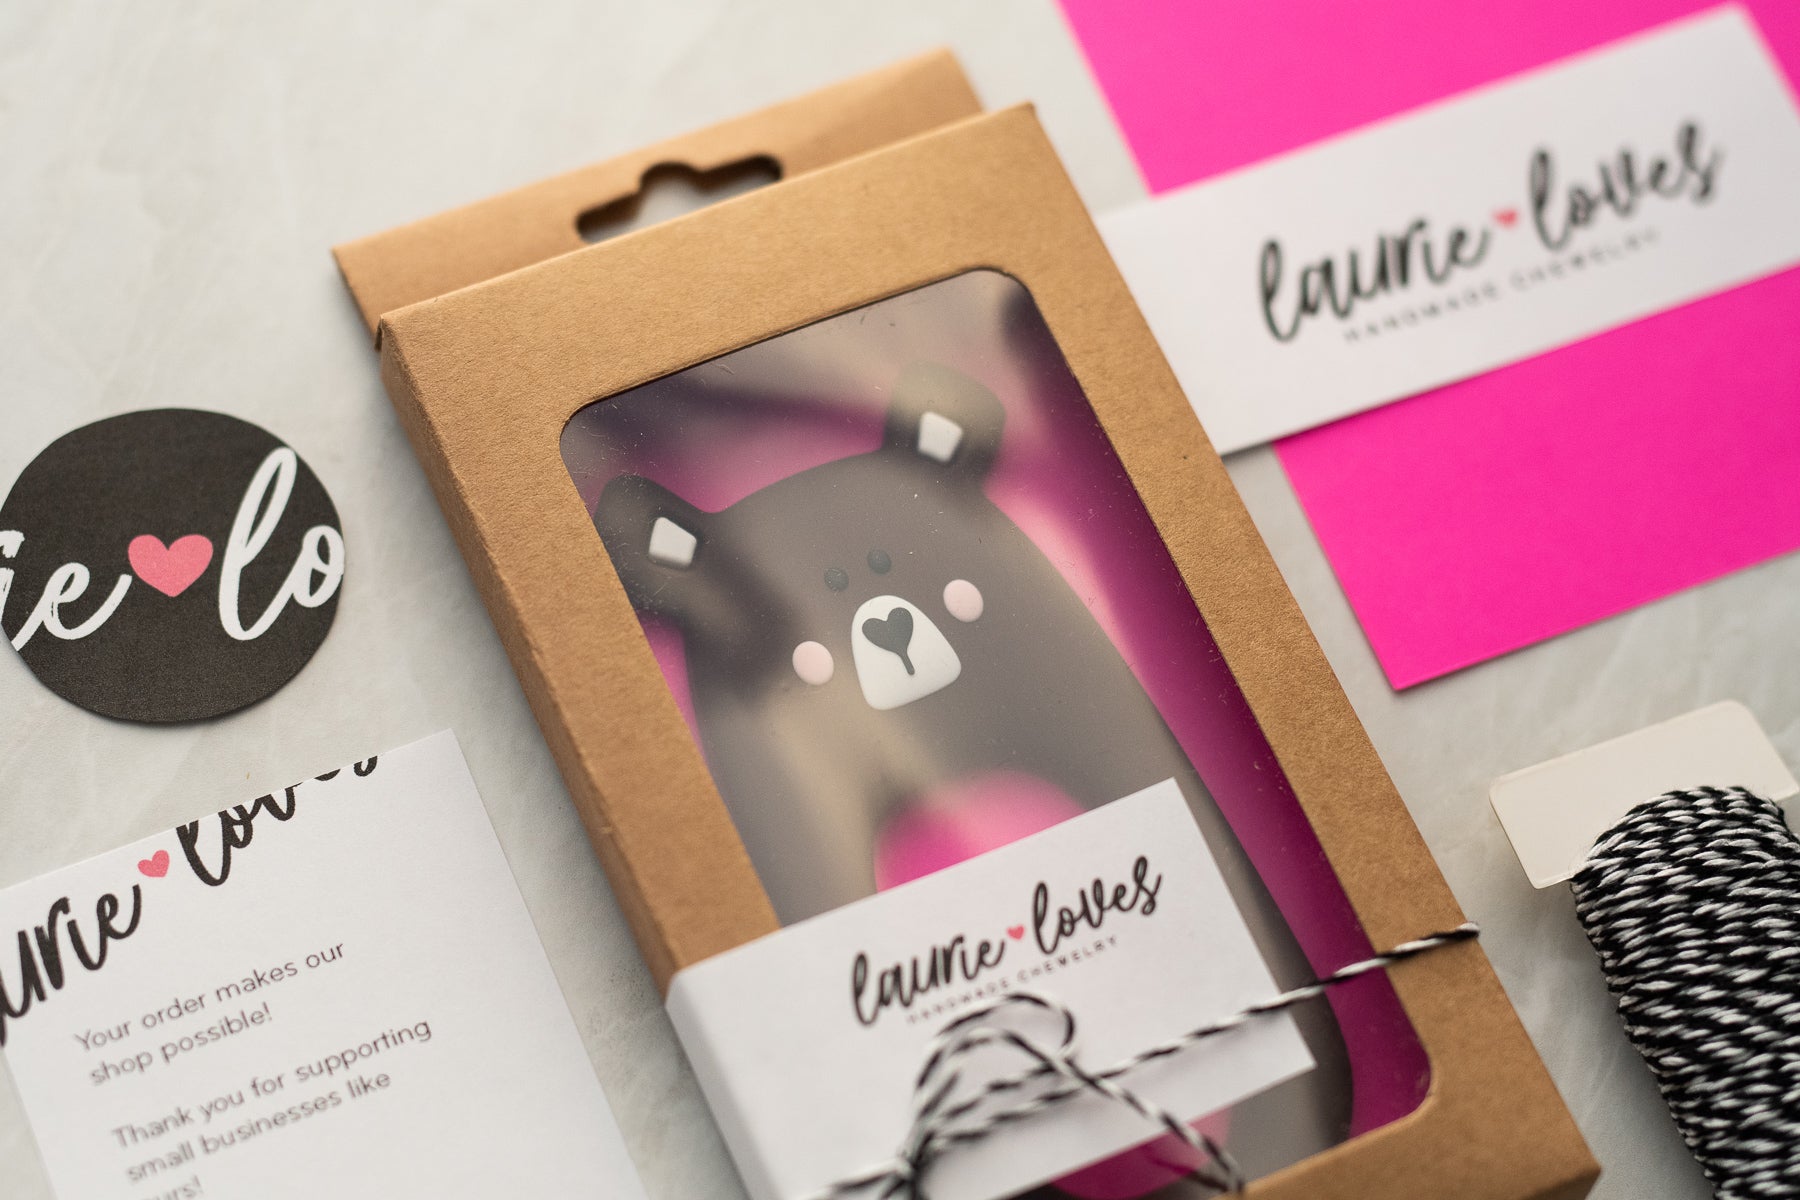 Amazing Packaging Hacks for your Handmade Small Business! - Cara & Co Blog Posts